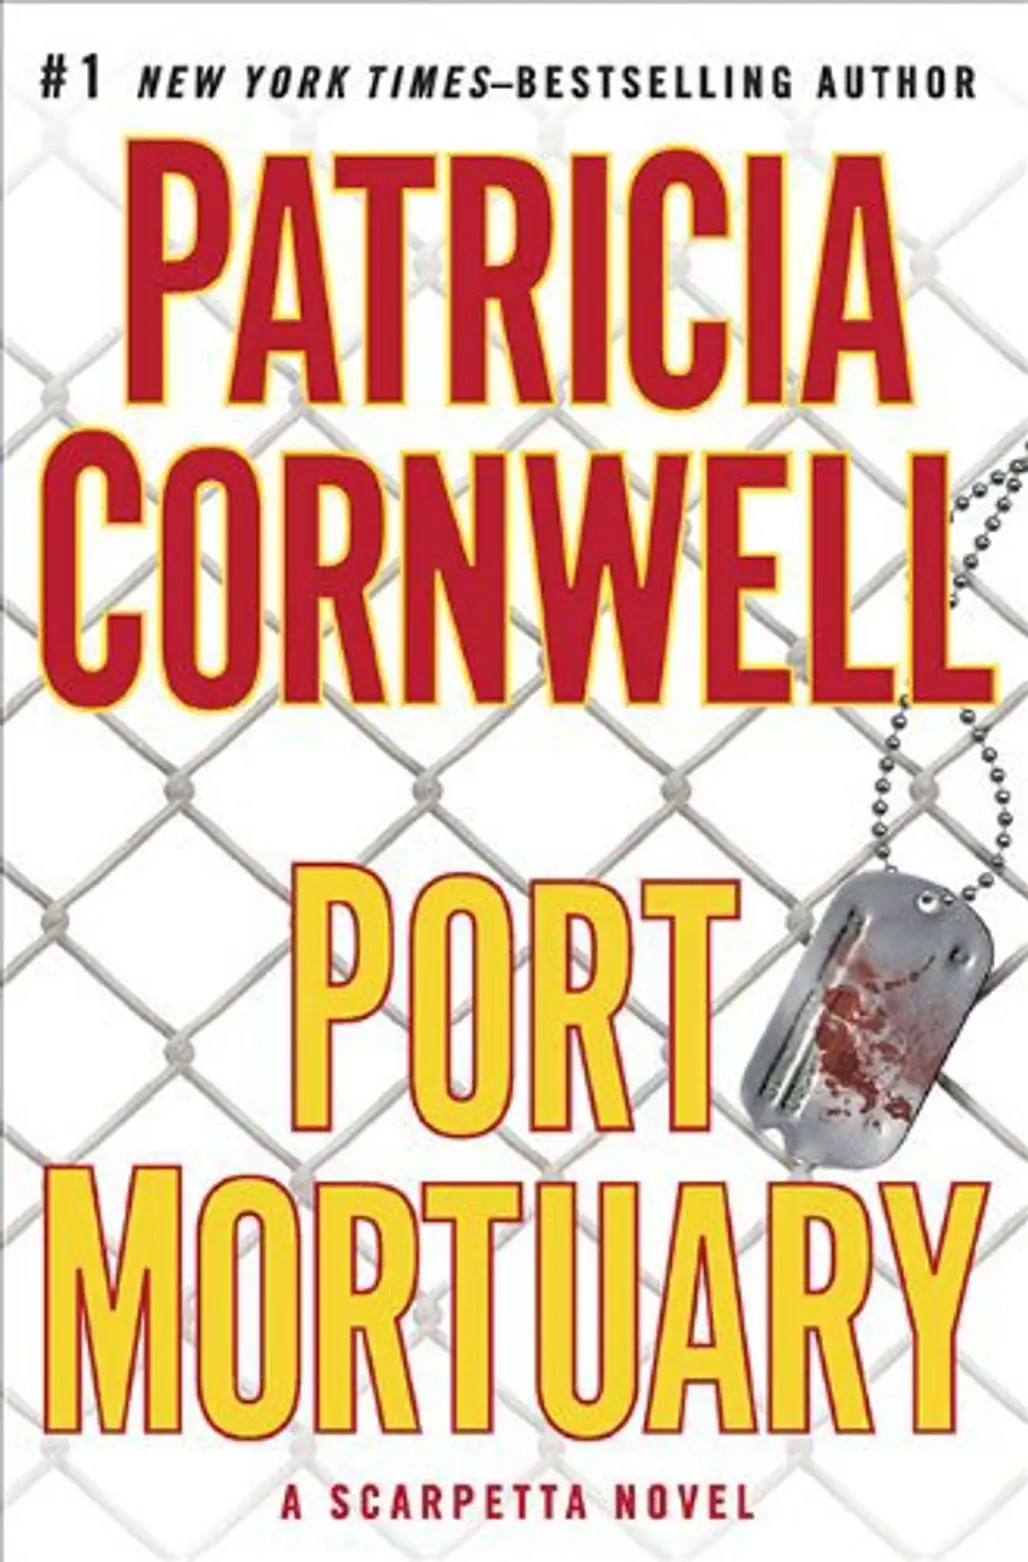 Post Mortuary by Patricia Cornwell